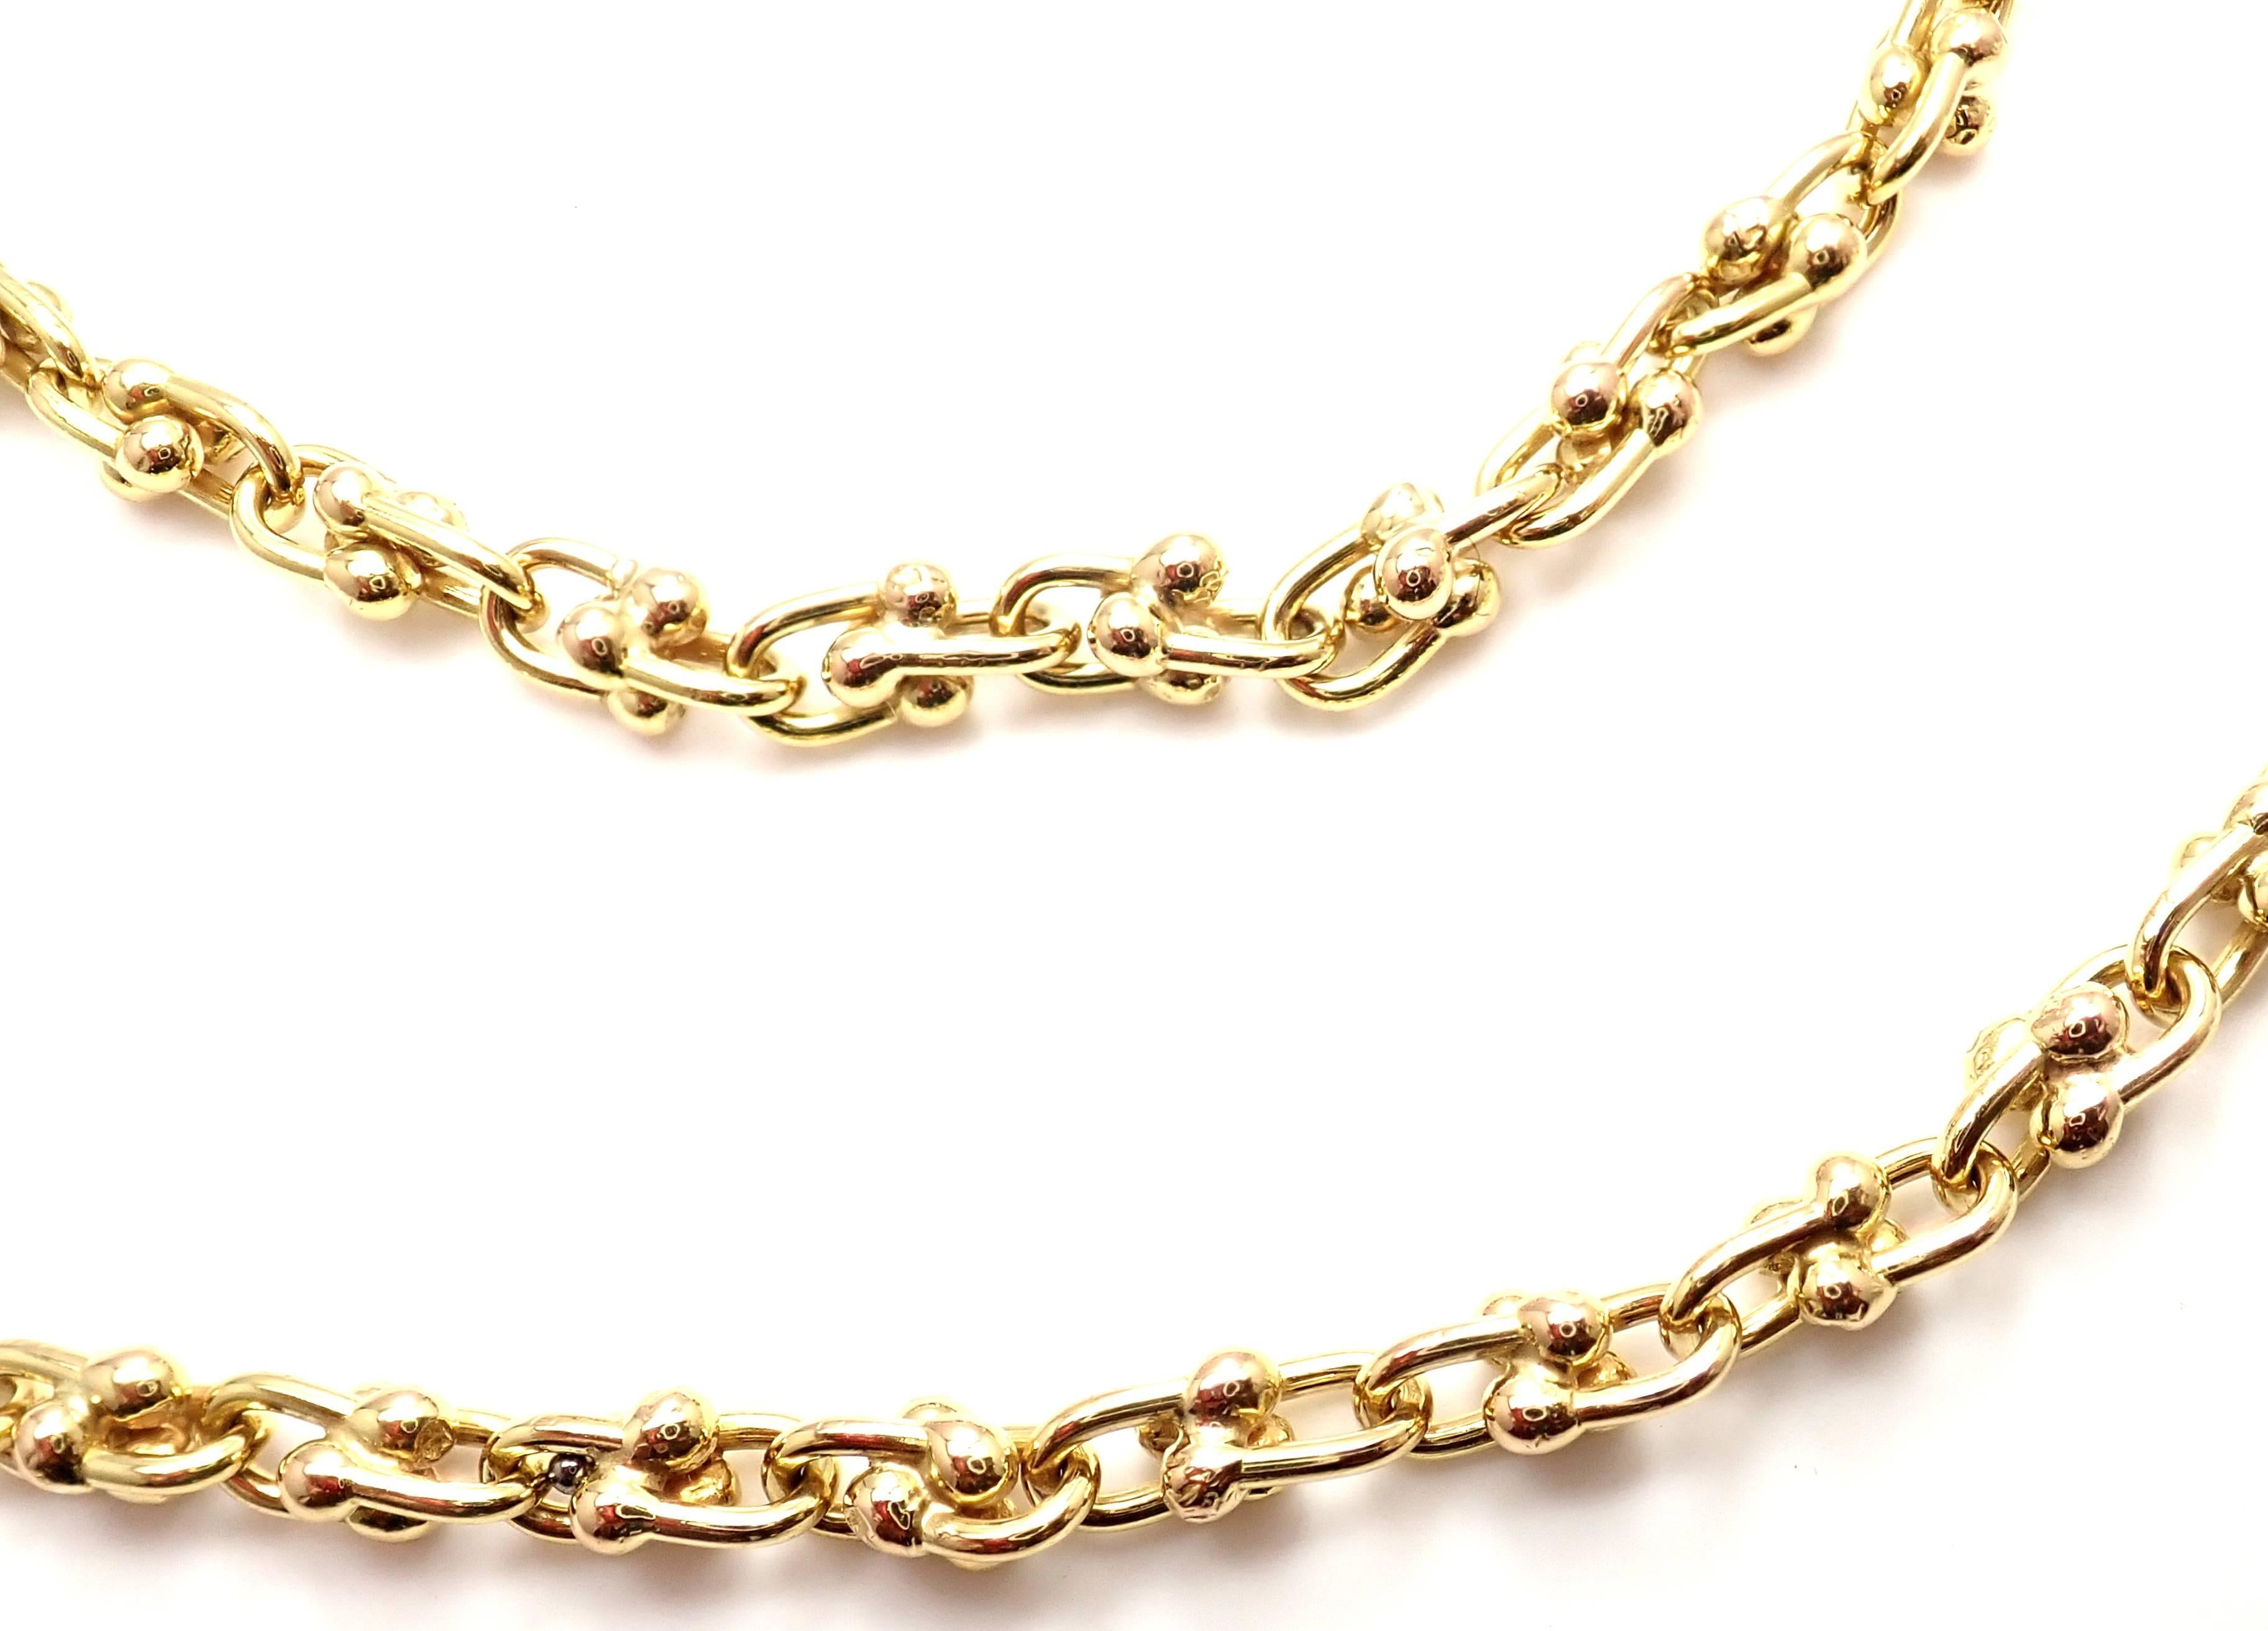 Vintage Van Cleef & Arpels Long Link Yellow Gold Chain Necklace 5